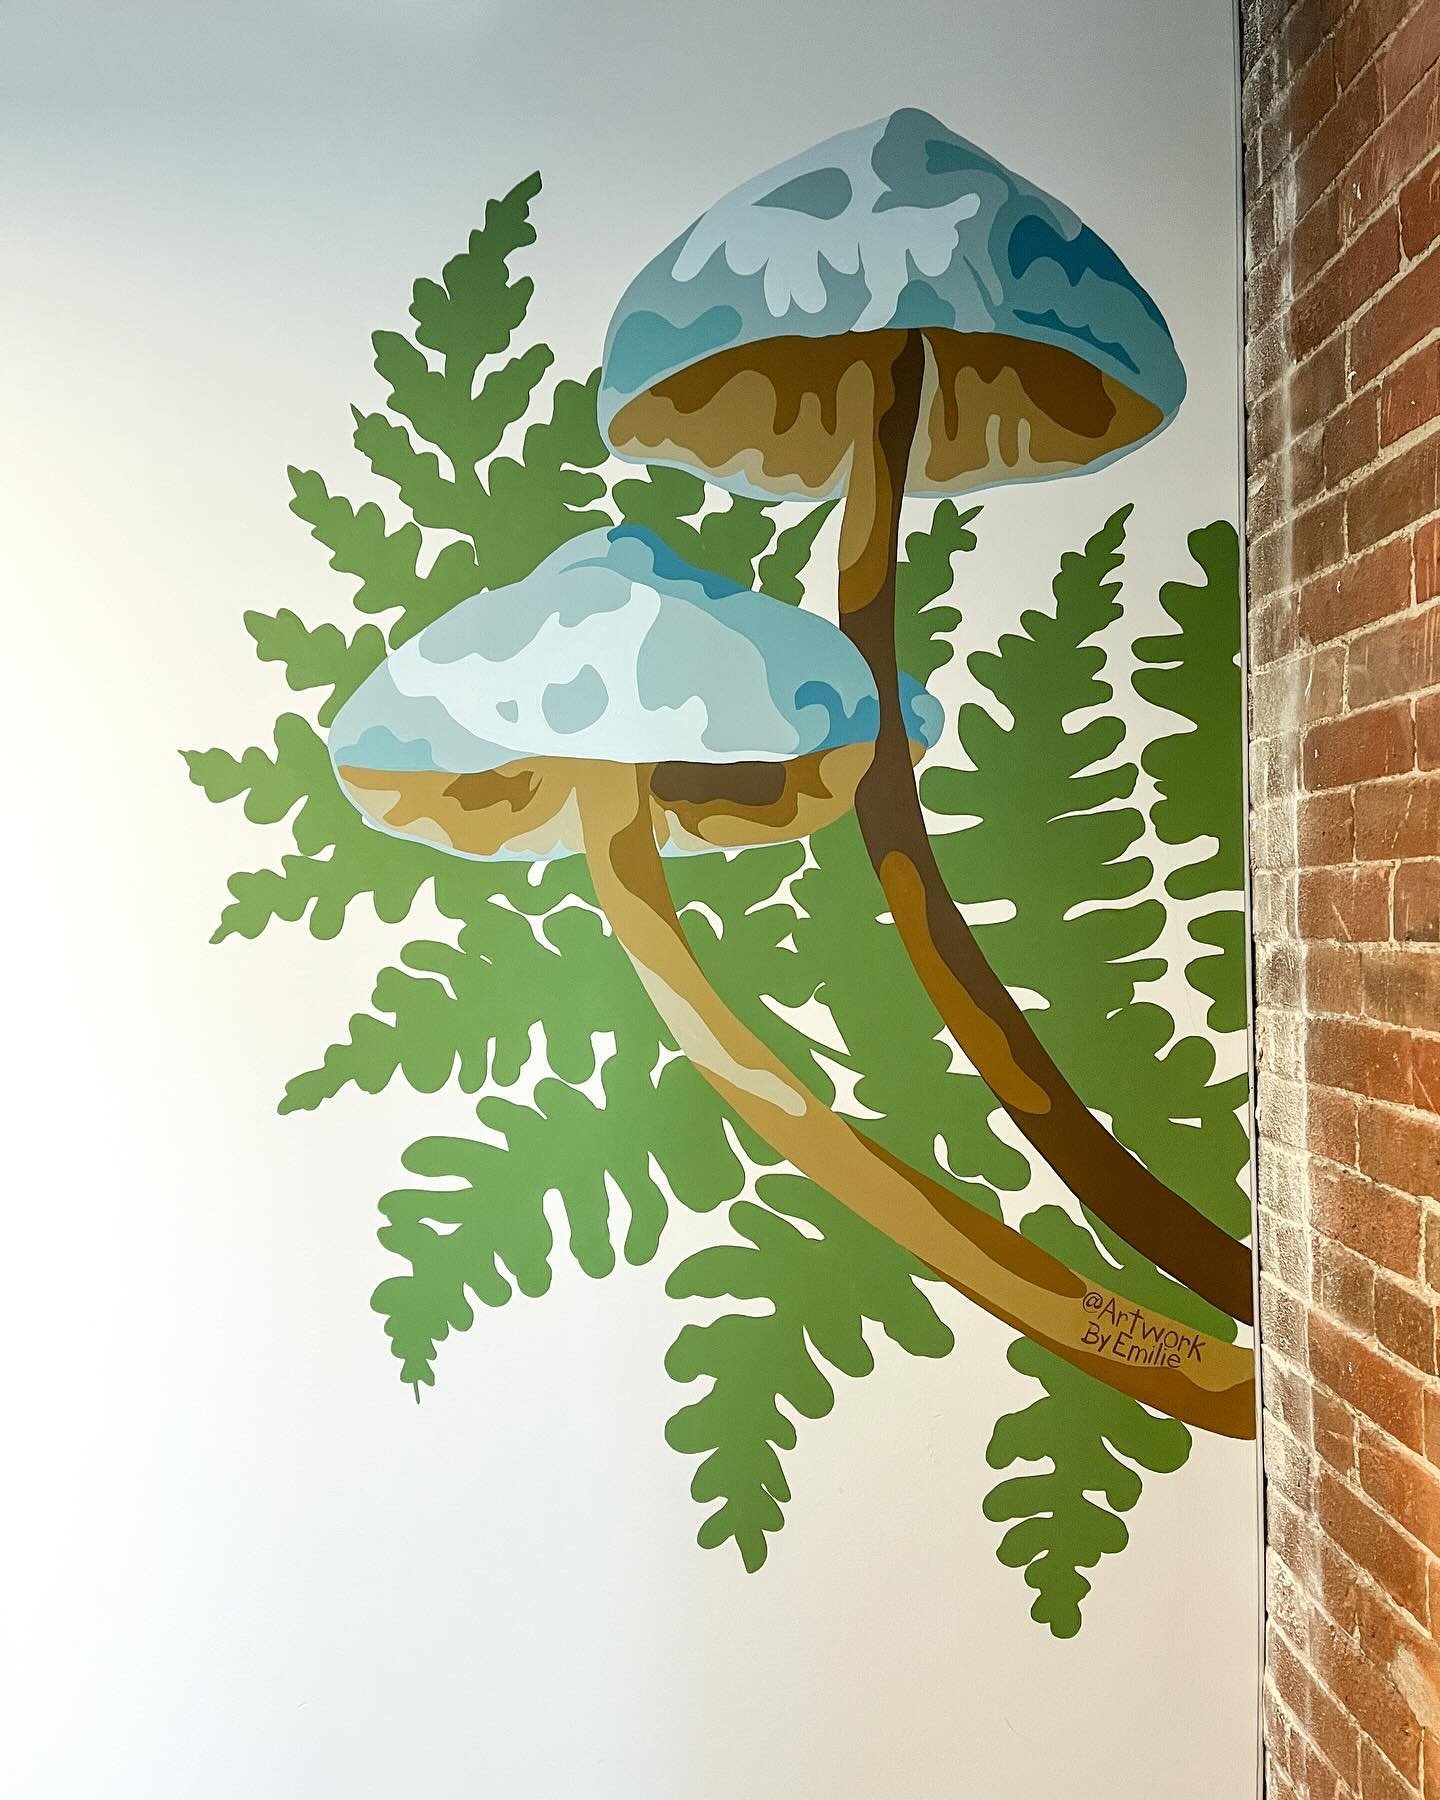 The sweetest blue mushrooms for Chelsea&rsquo;s office🌿

Small murals can make a big difference in your space. Send me an email or fill out the form on ArtworkByEmilie. com to book!

#mural #muralarts #muralartwork #muralartist #muralpainting #mushr